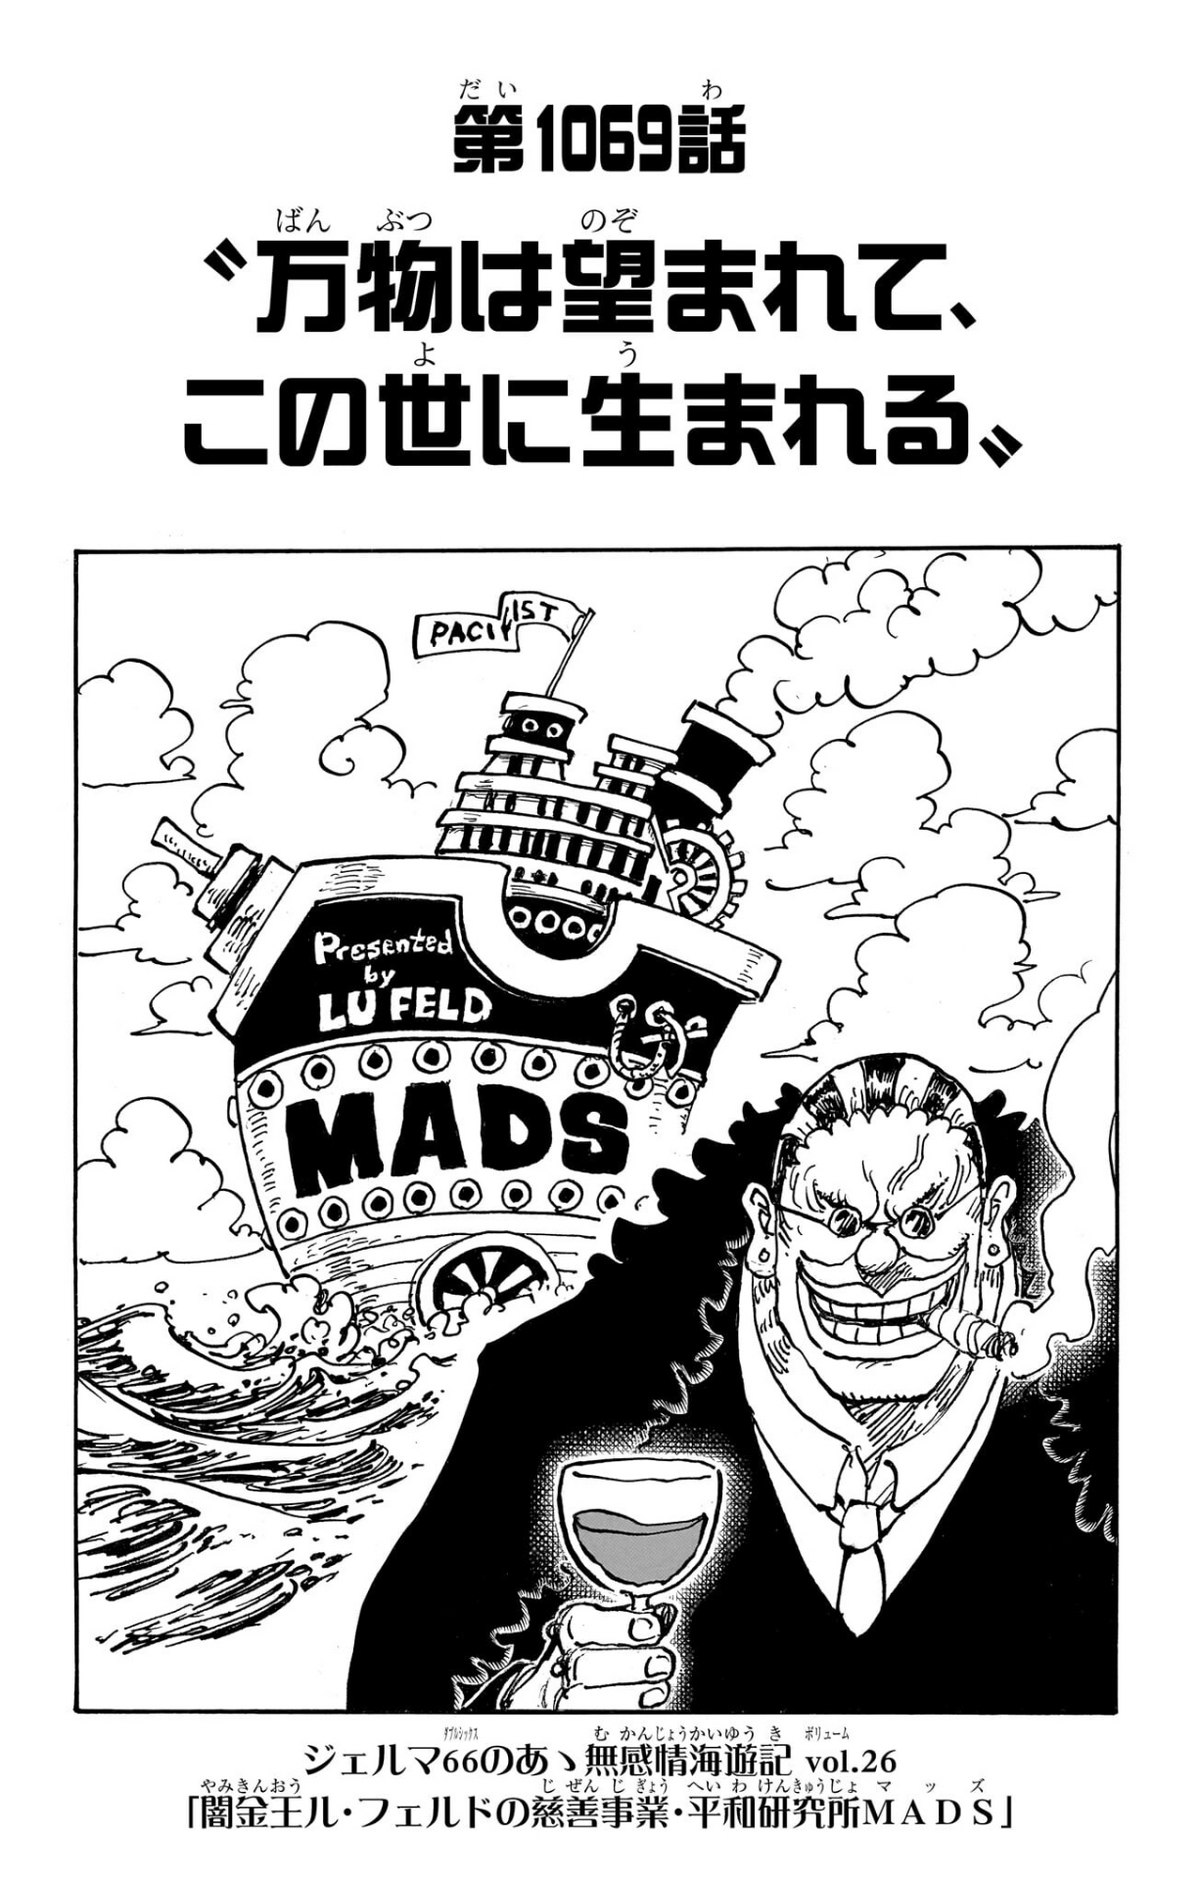 Chapter 1061 theory : r/OnePiece